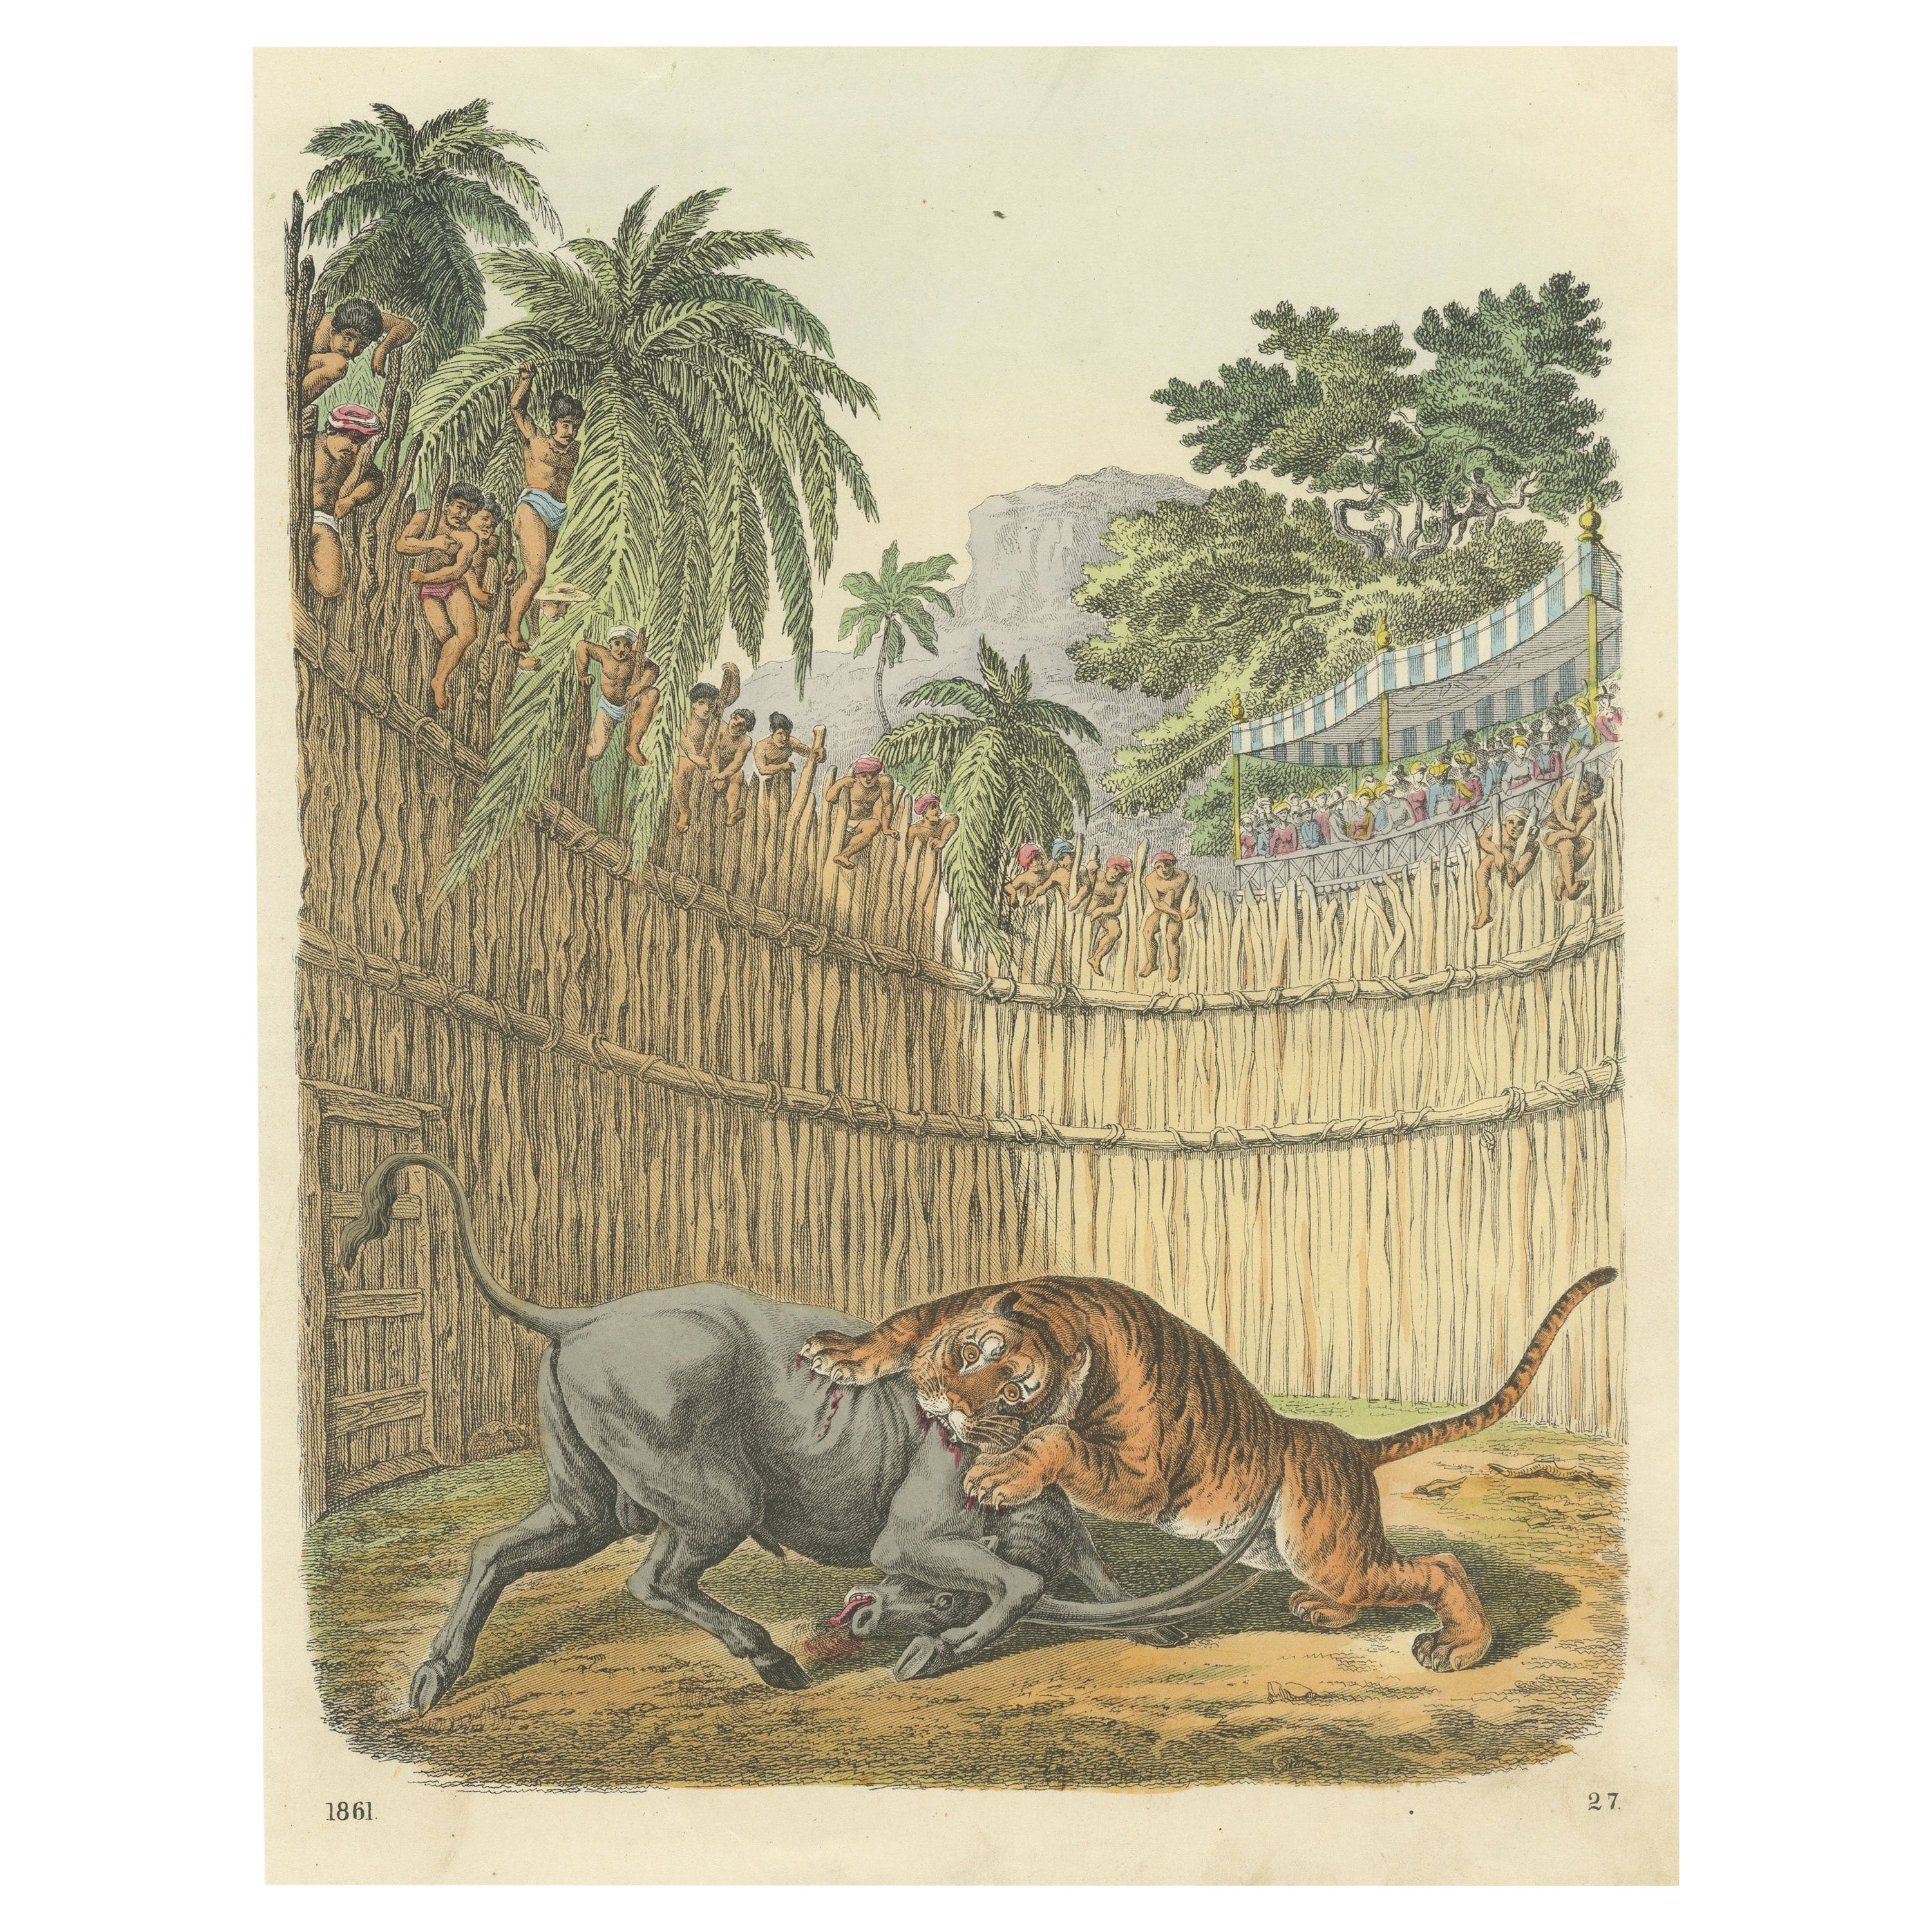 Original Antique Print of a Fight Between a Tiger and Antelope